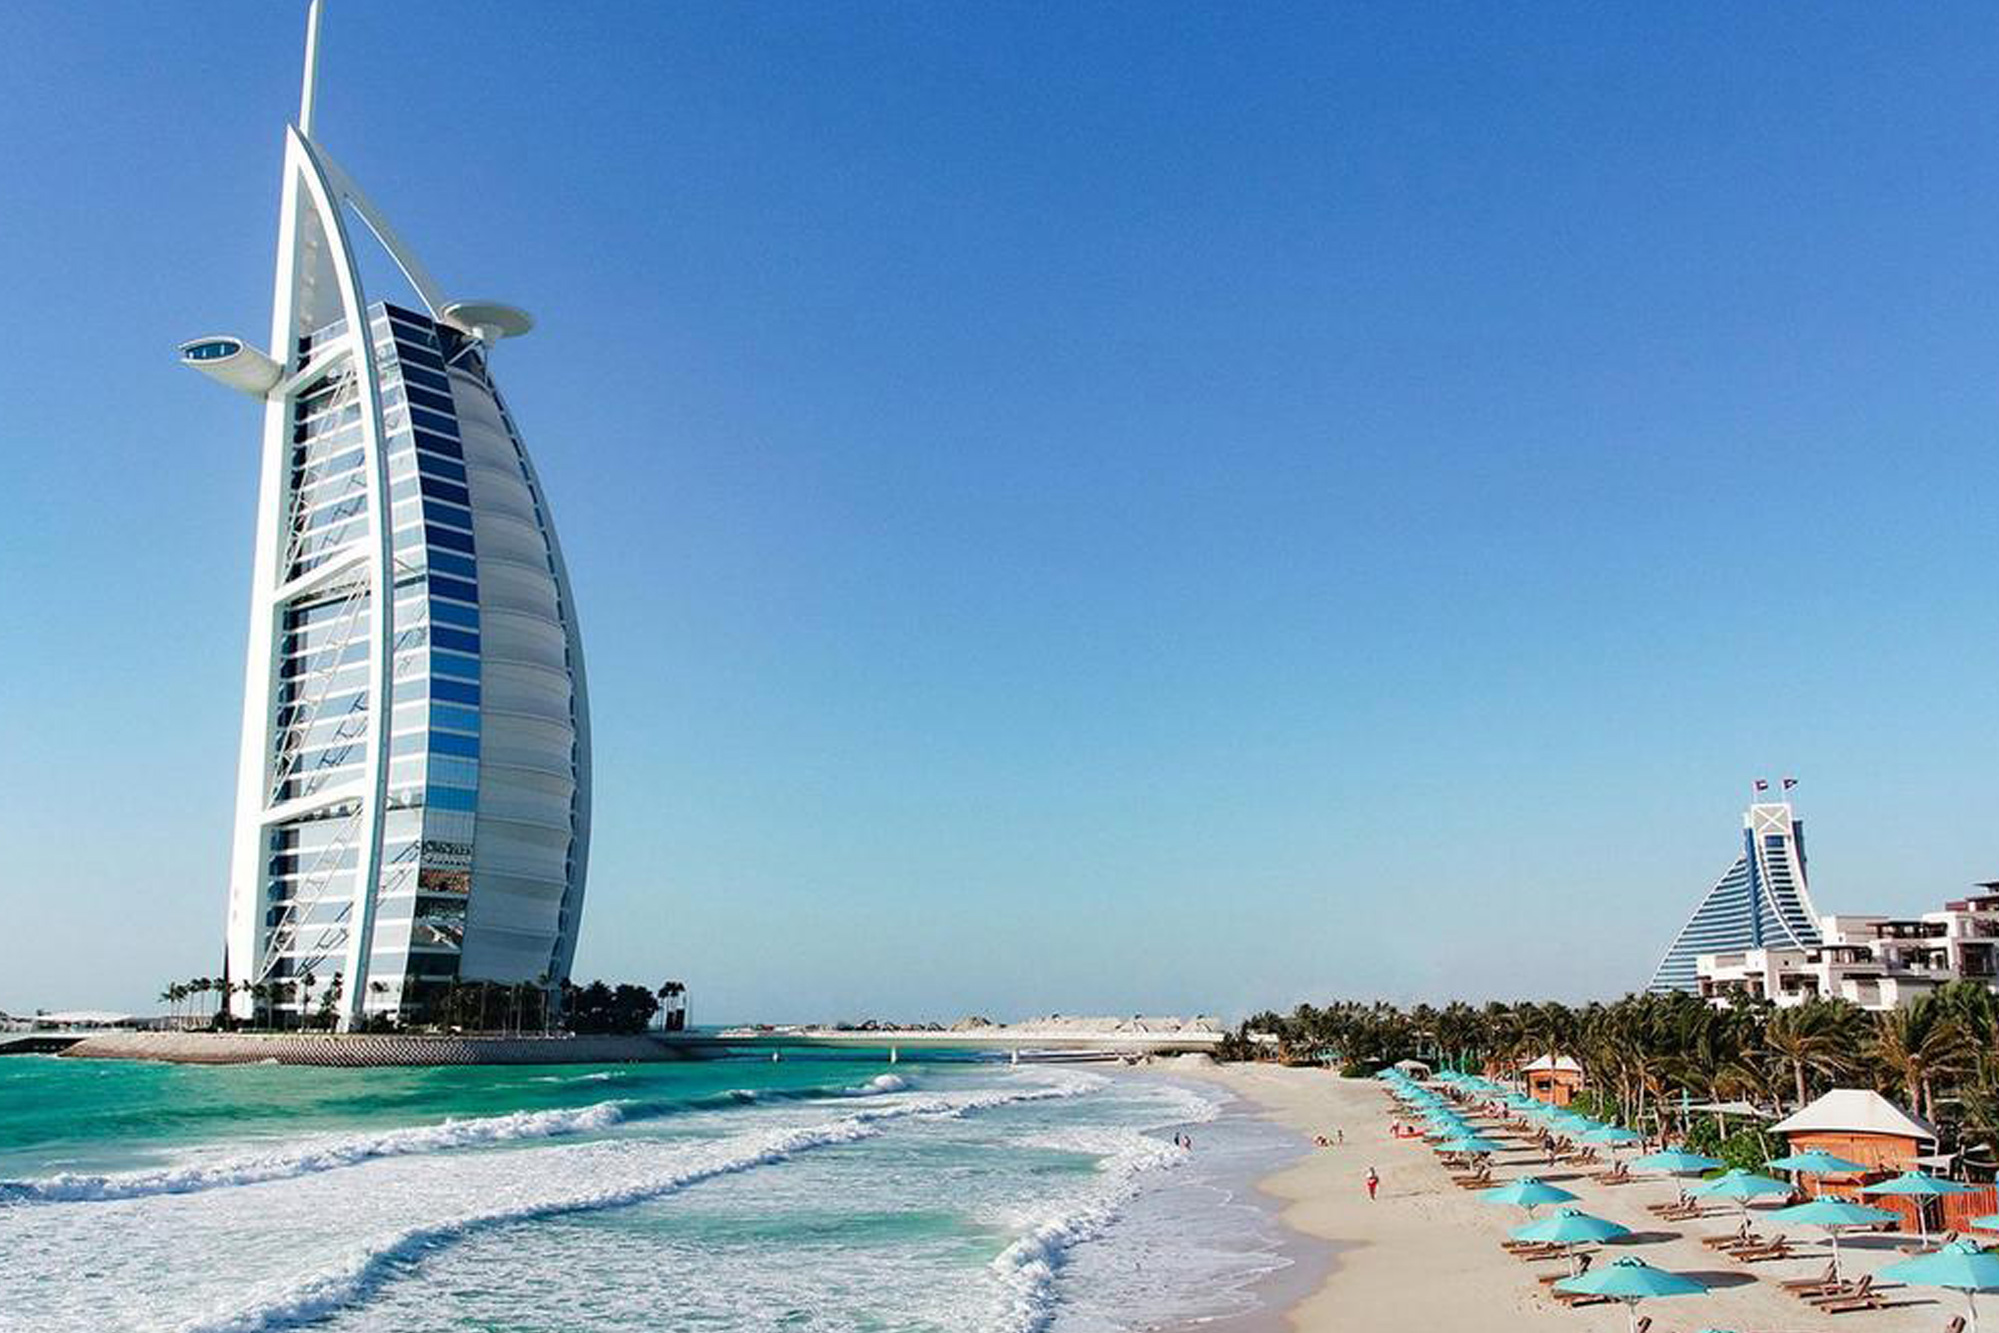 Dubai becomes Top Holiday Destination in 2022